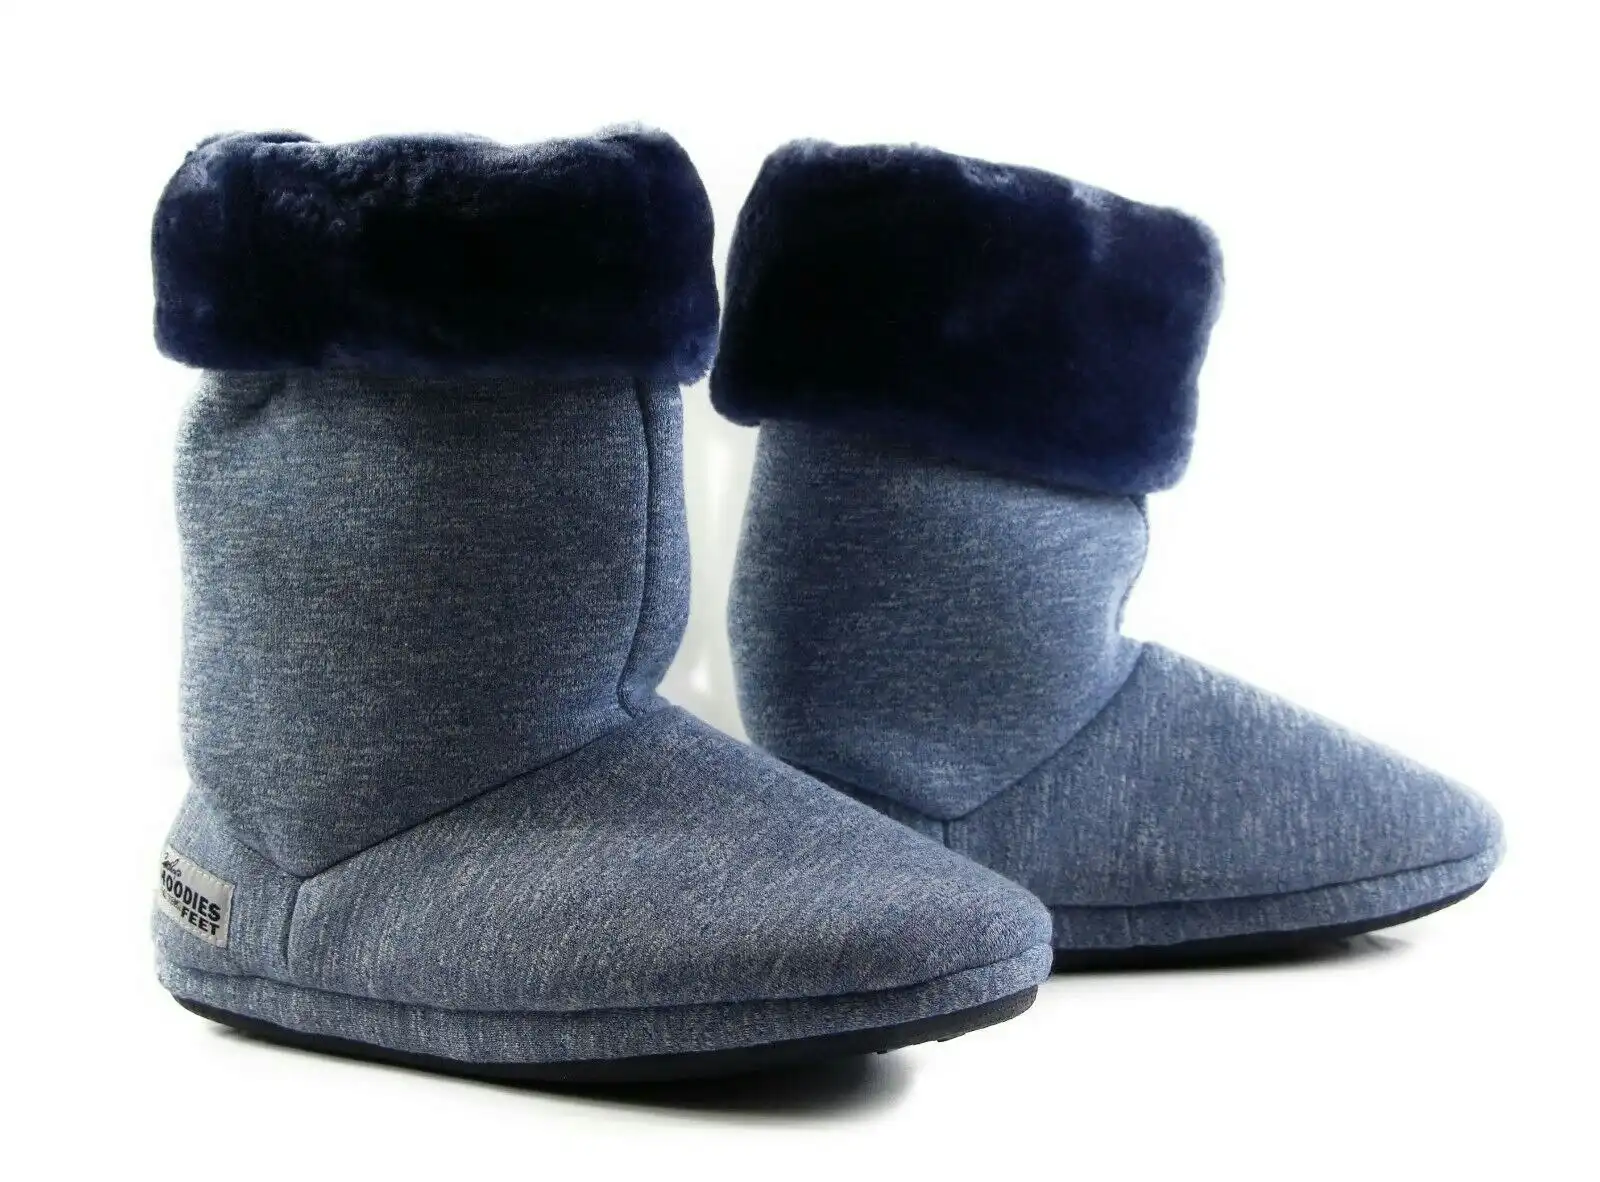 Womens Grosby Hoodies Boots Plush Fluffy Navy Slippers